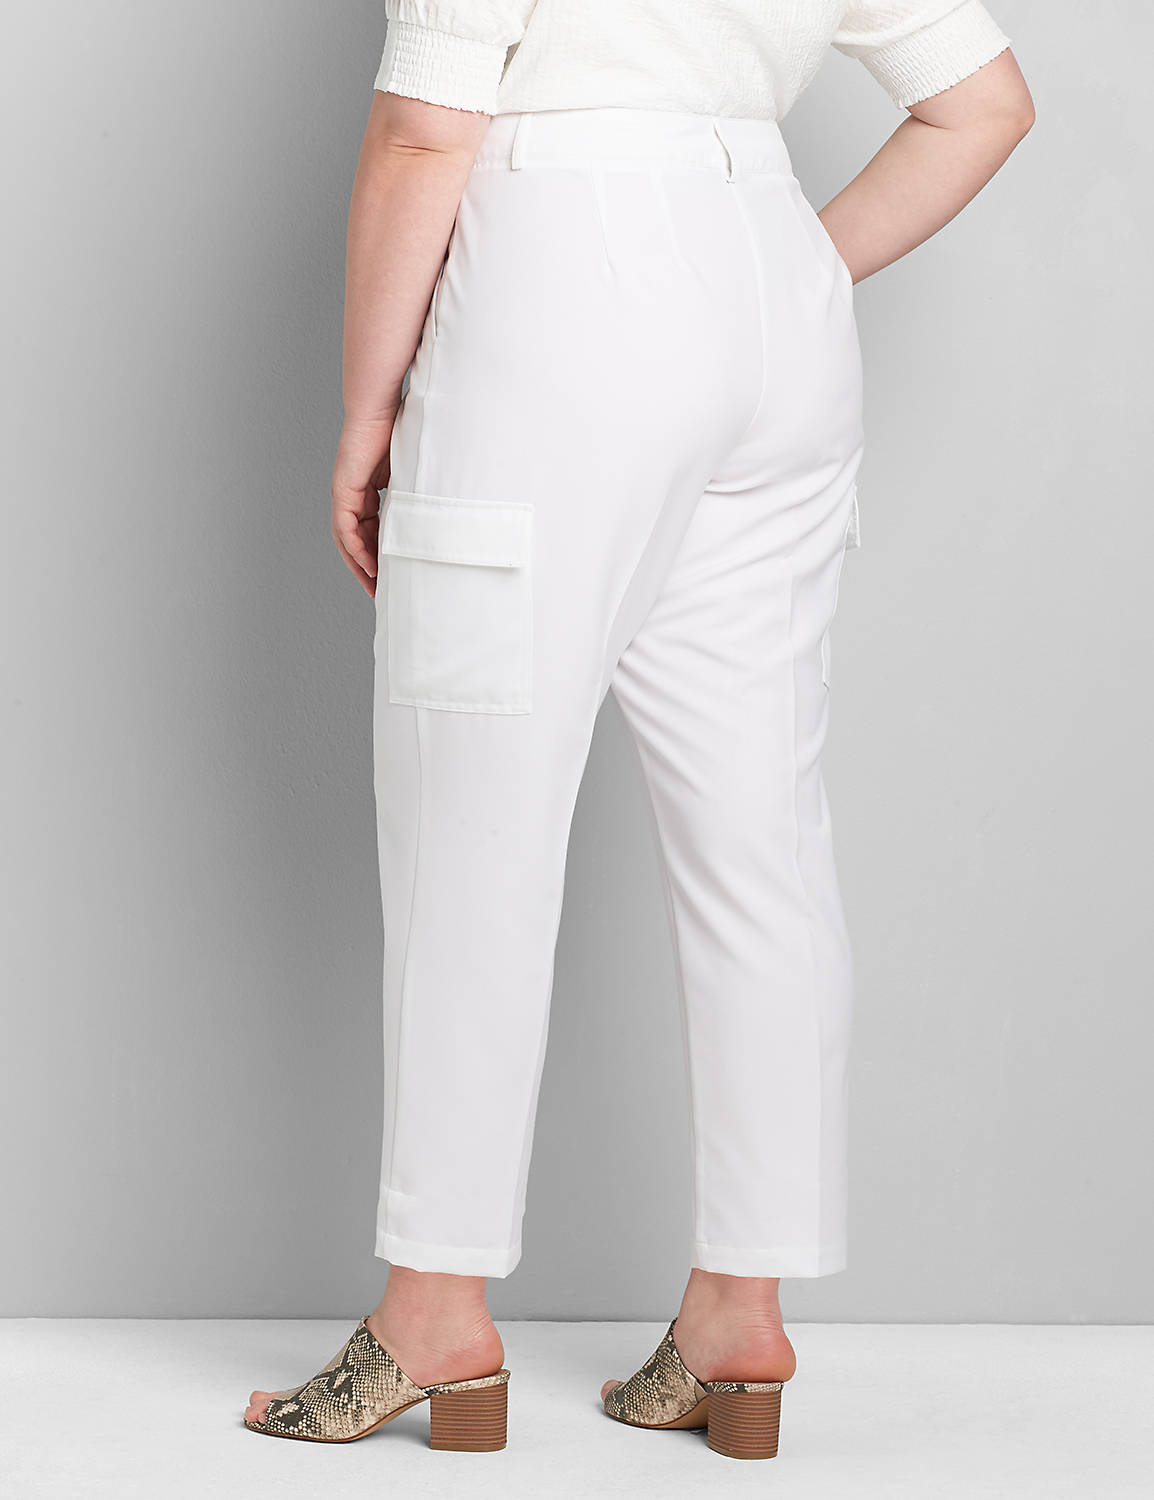 Perfect Drape Relaxed Ankle Pant - White Cargo Product Image 2